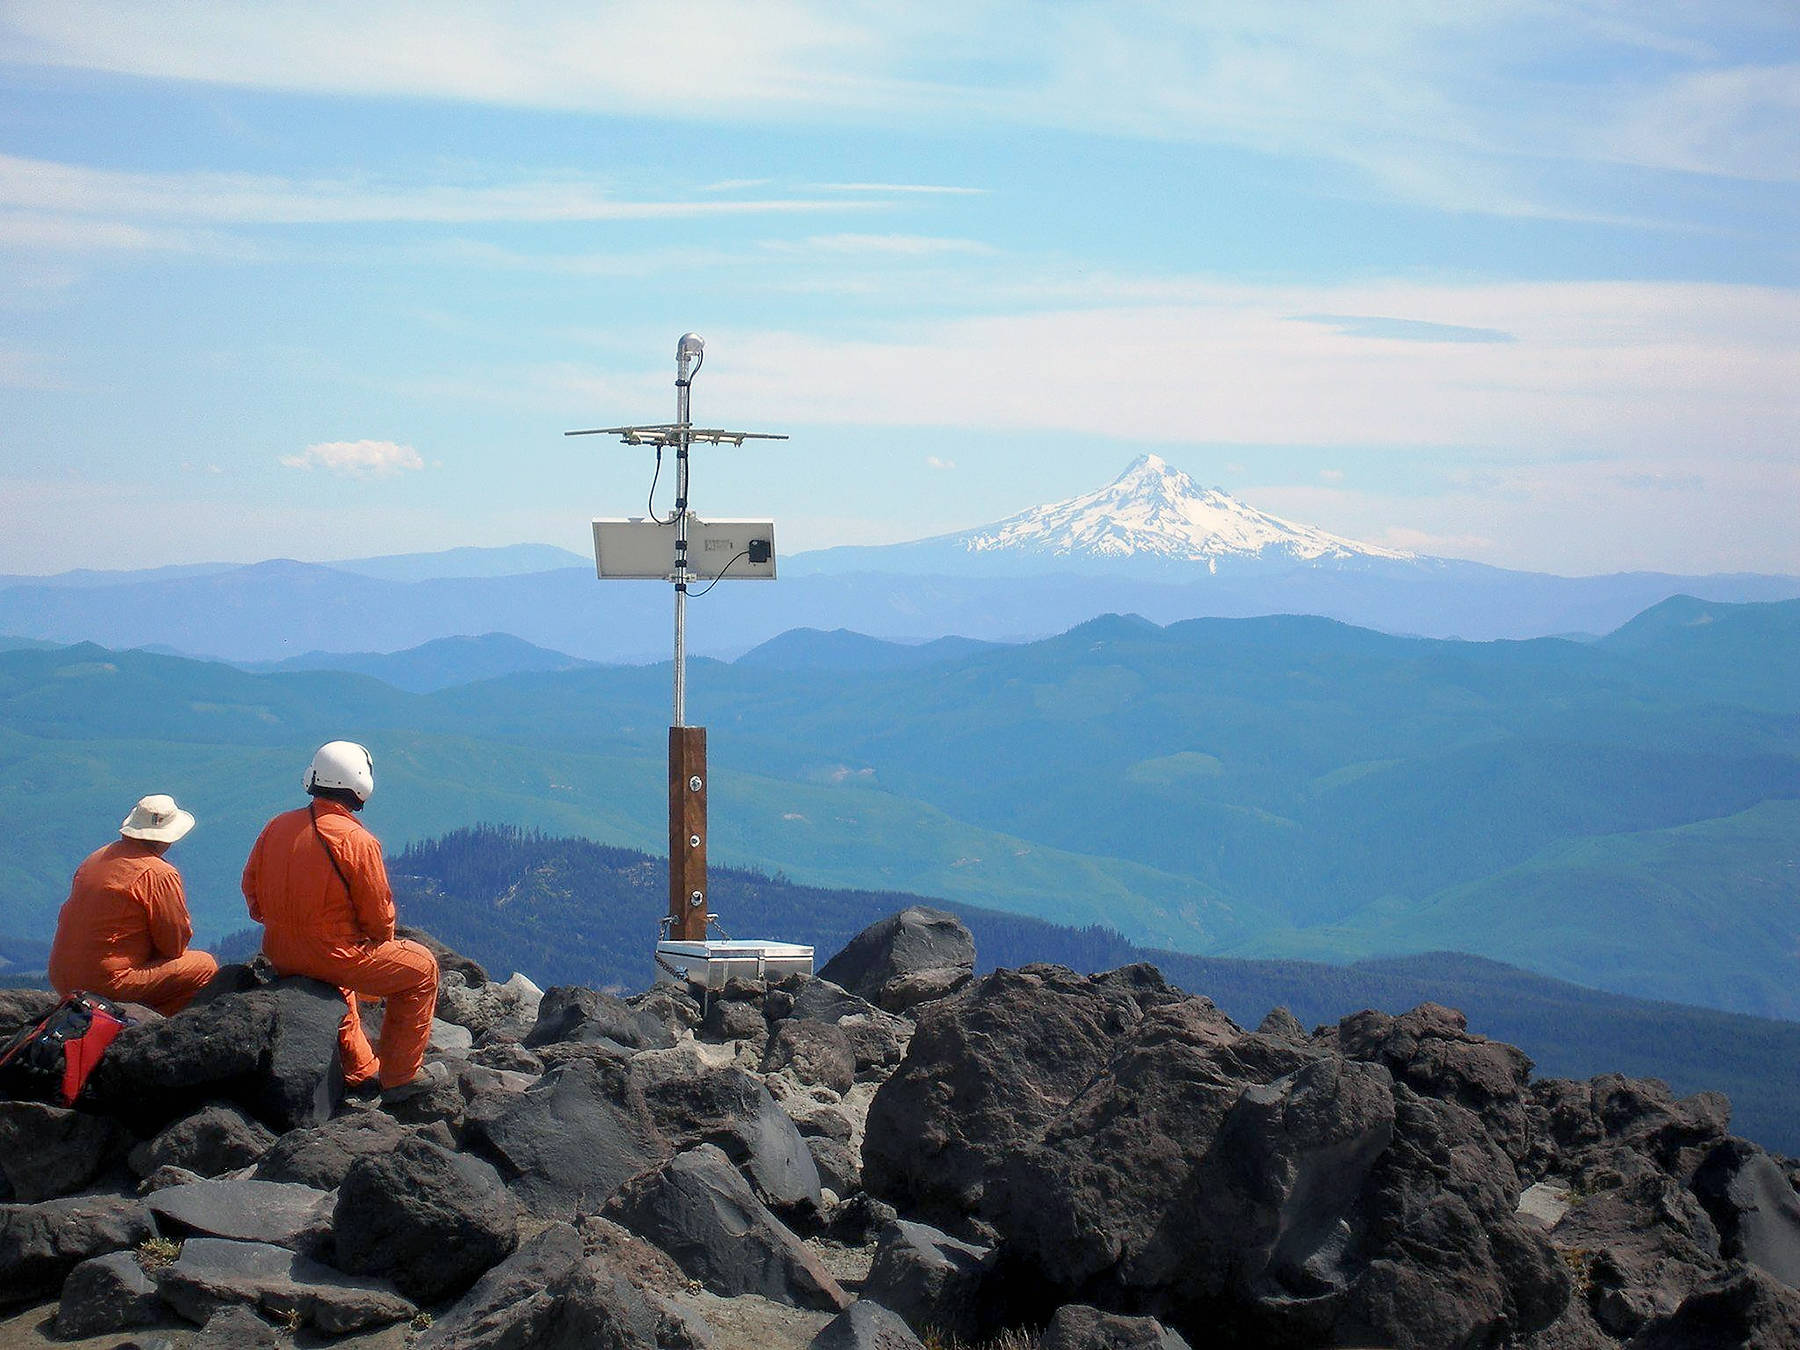 Karl Hagel and Pat McChesney, field engineers with the Pacific Northwest Seismic Network team at the University of Washington, install earthquake monitoring equipment on the slopes of Mount St. Helens, with Mount Hood in the distance. (Marc Biundo / University of Washington)